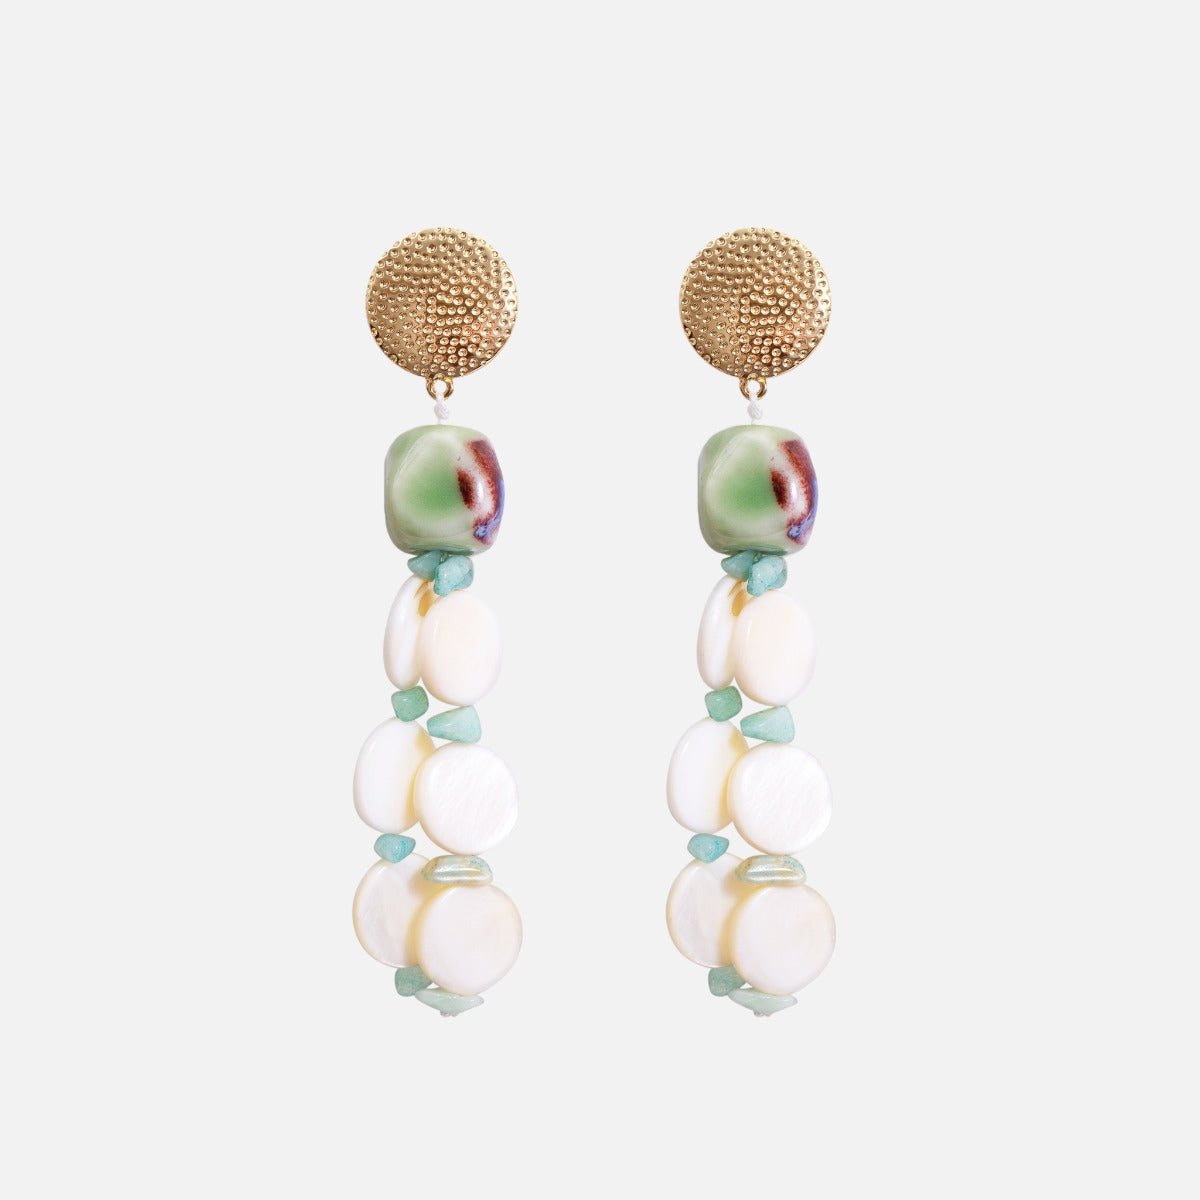 Long golden earrings with beads and pearl effect